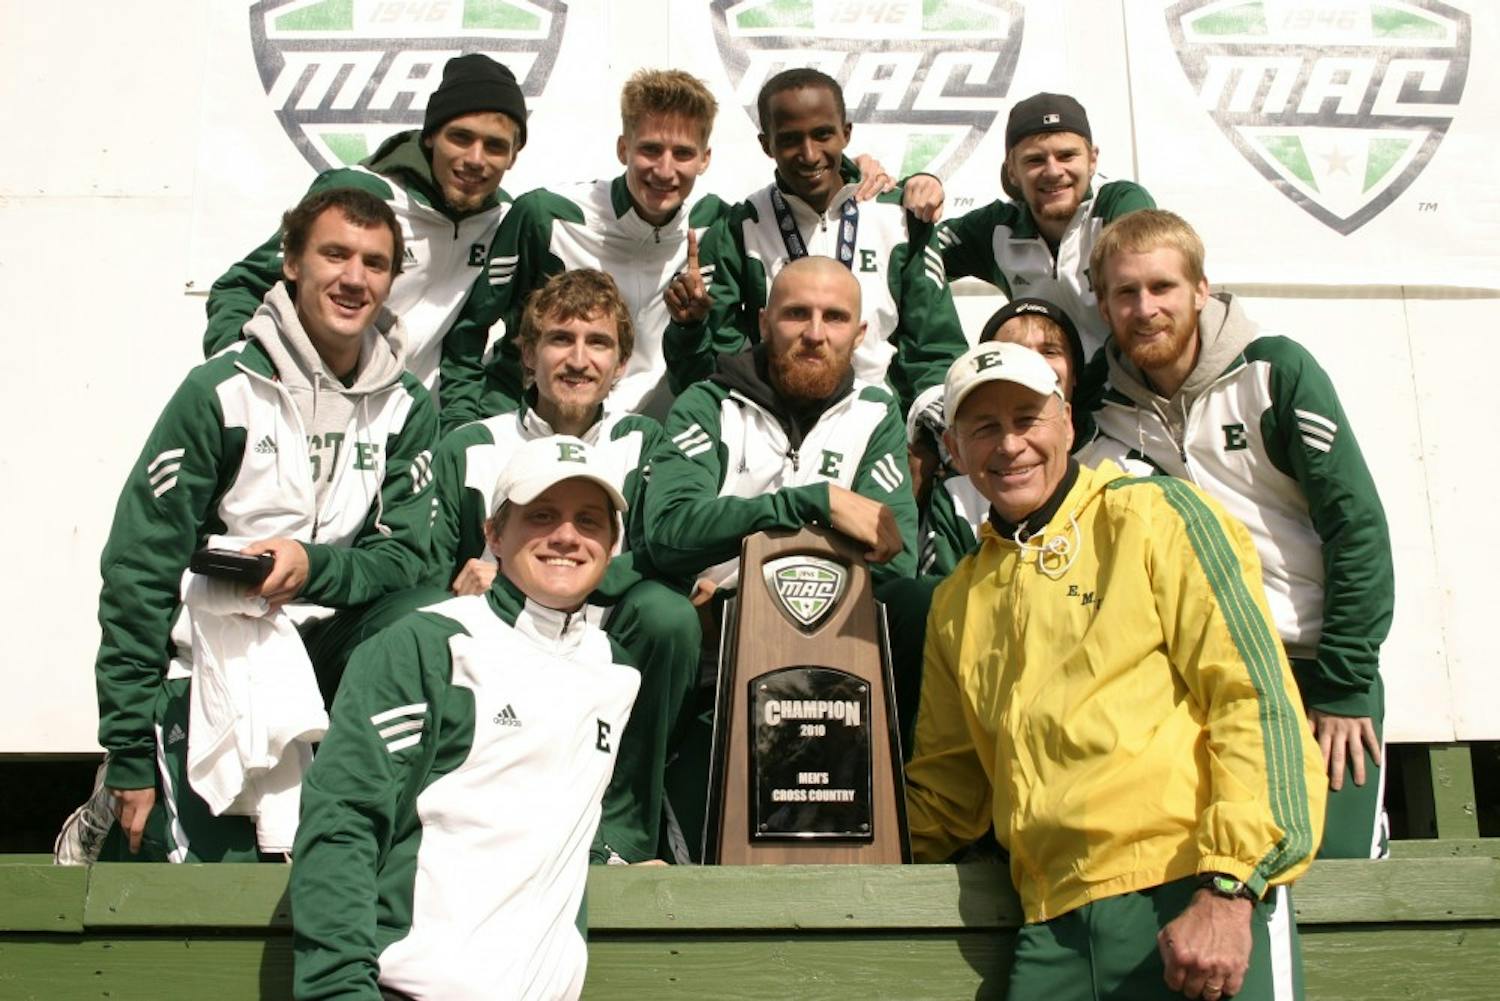 The Eagles defeated last year’s champions, Kent State, as well as Miami (Ohio). Coach John Goodridge was also named 2010 Men’s Cross Country Coach of the Year.